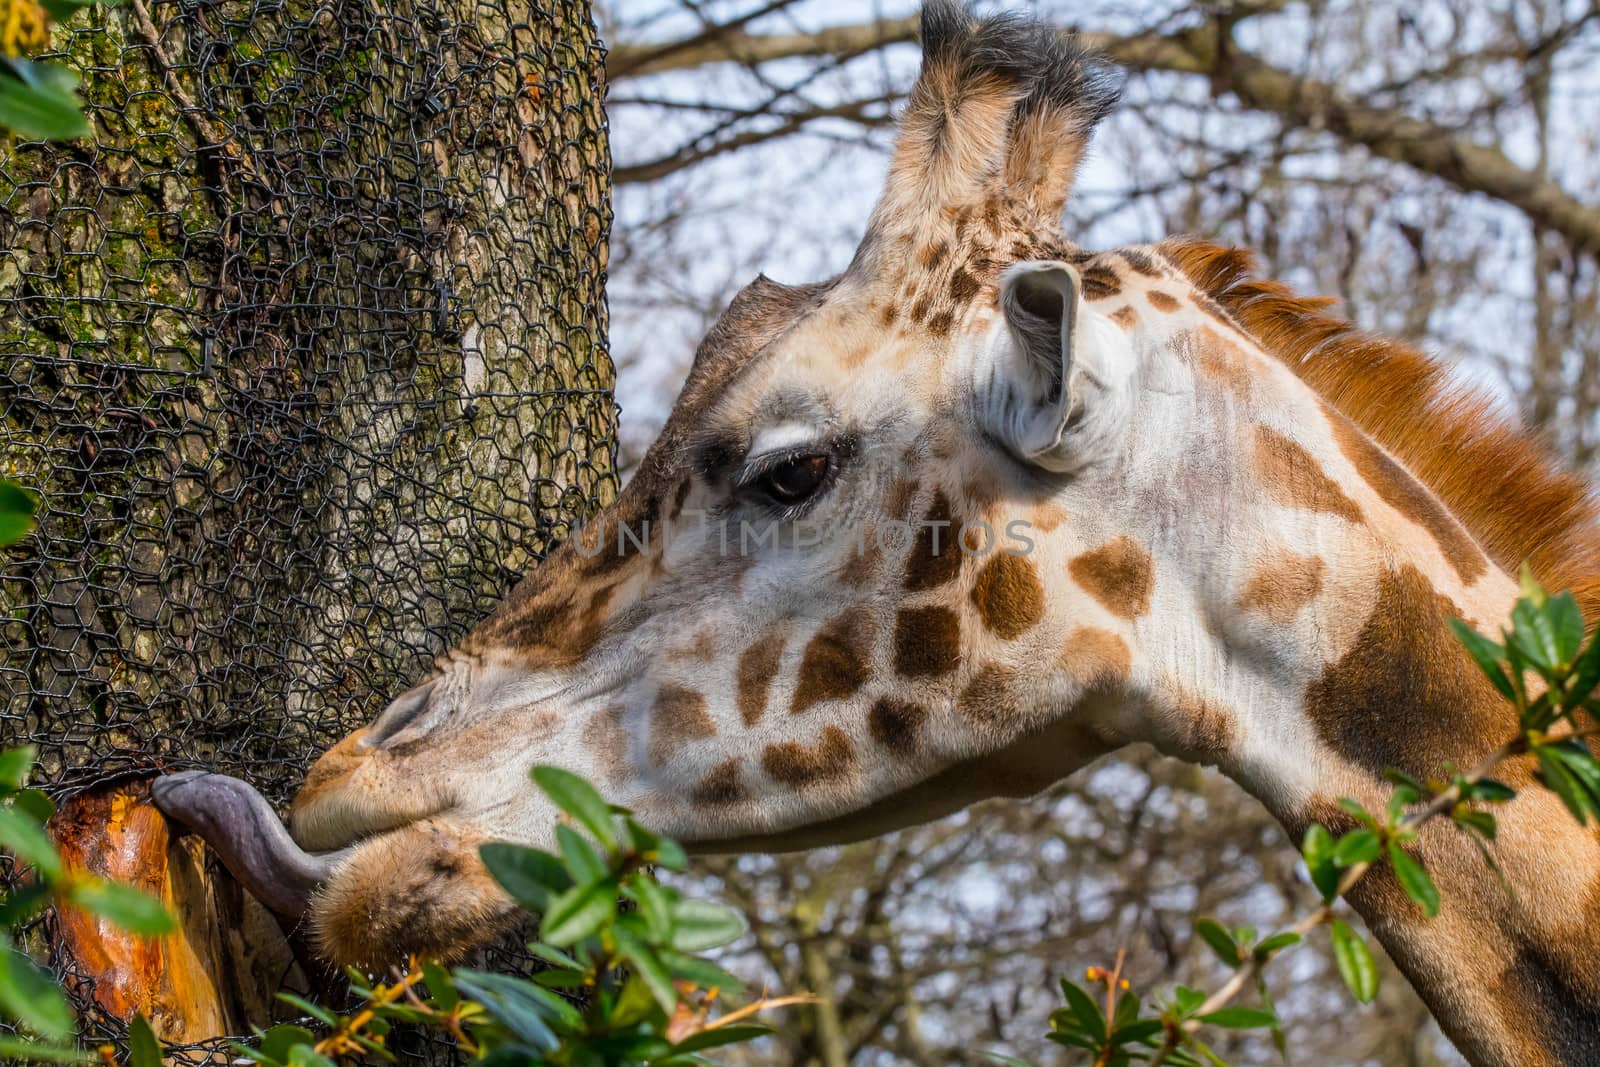 Giraff at Zoo by cestes001